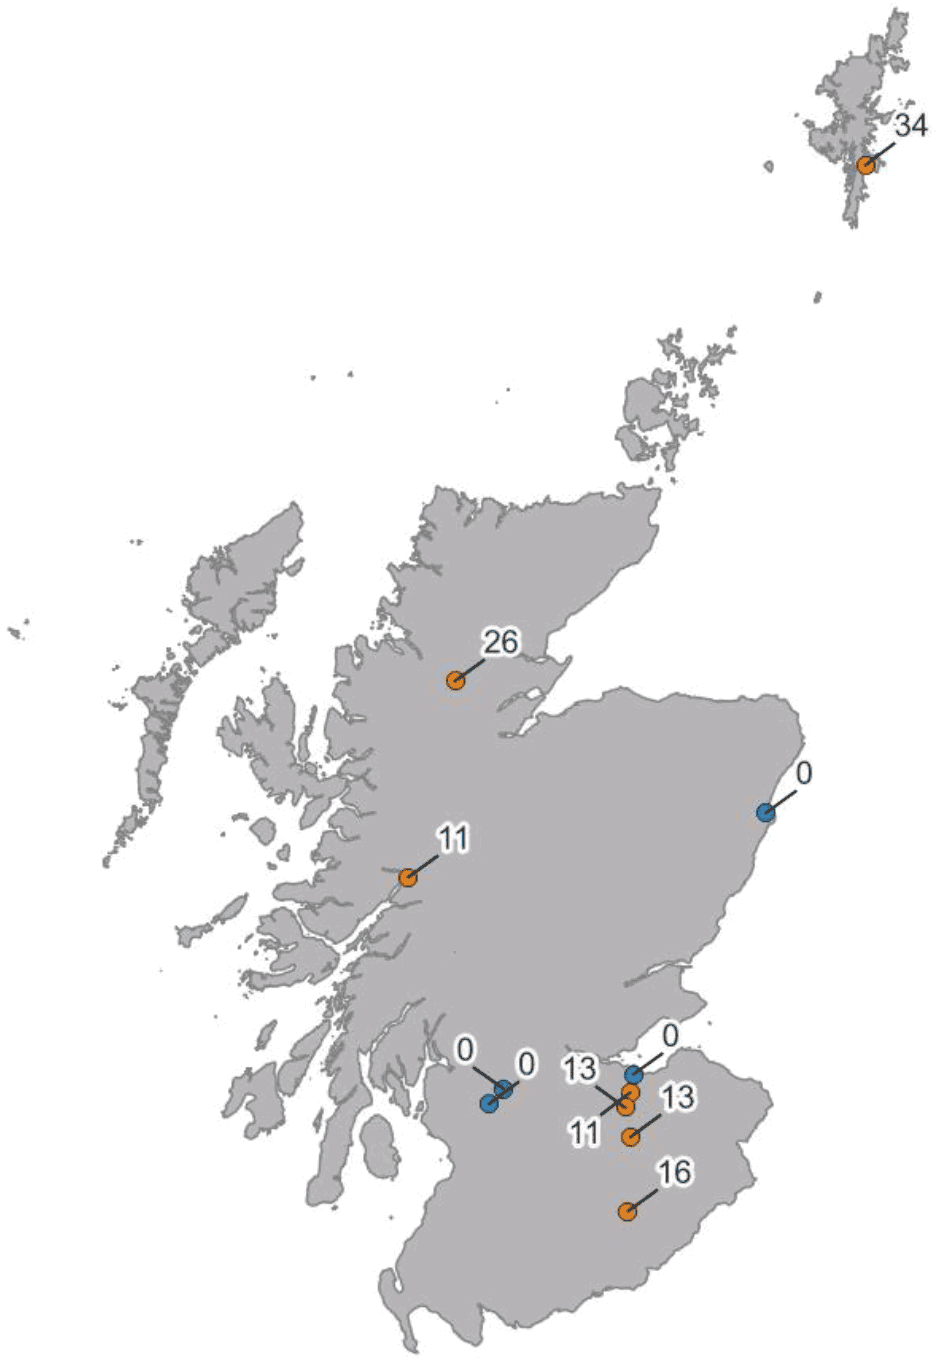 Locations of ozone monitoring sites in Scotland and showing numbers of times ozone limits were exceeded at each site in 2019.